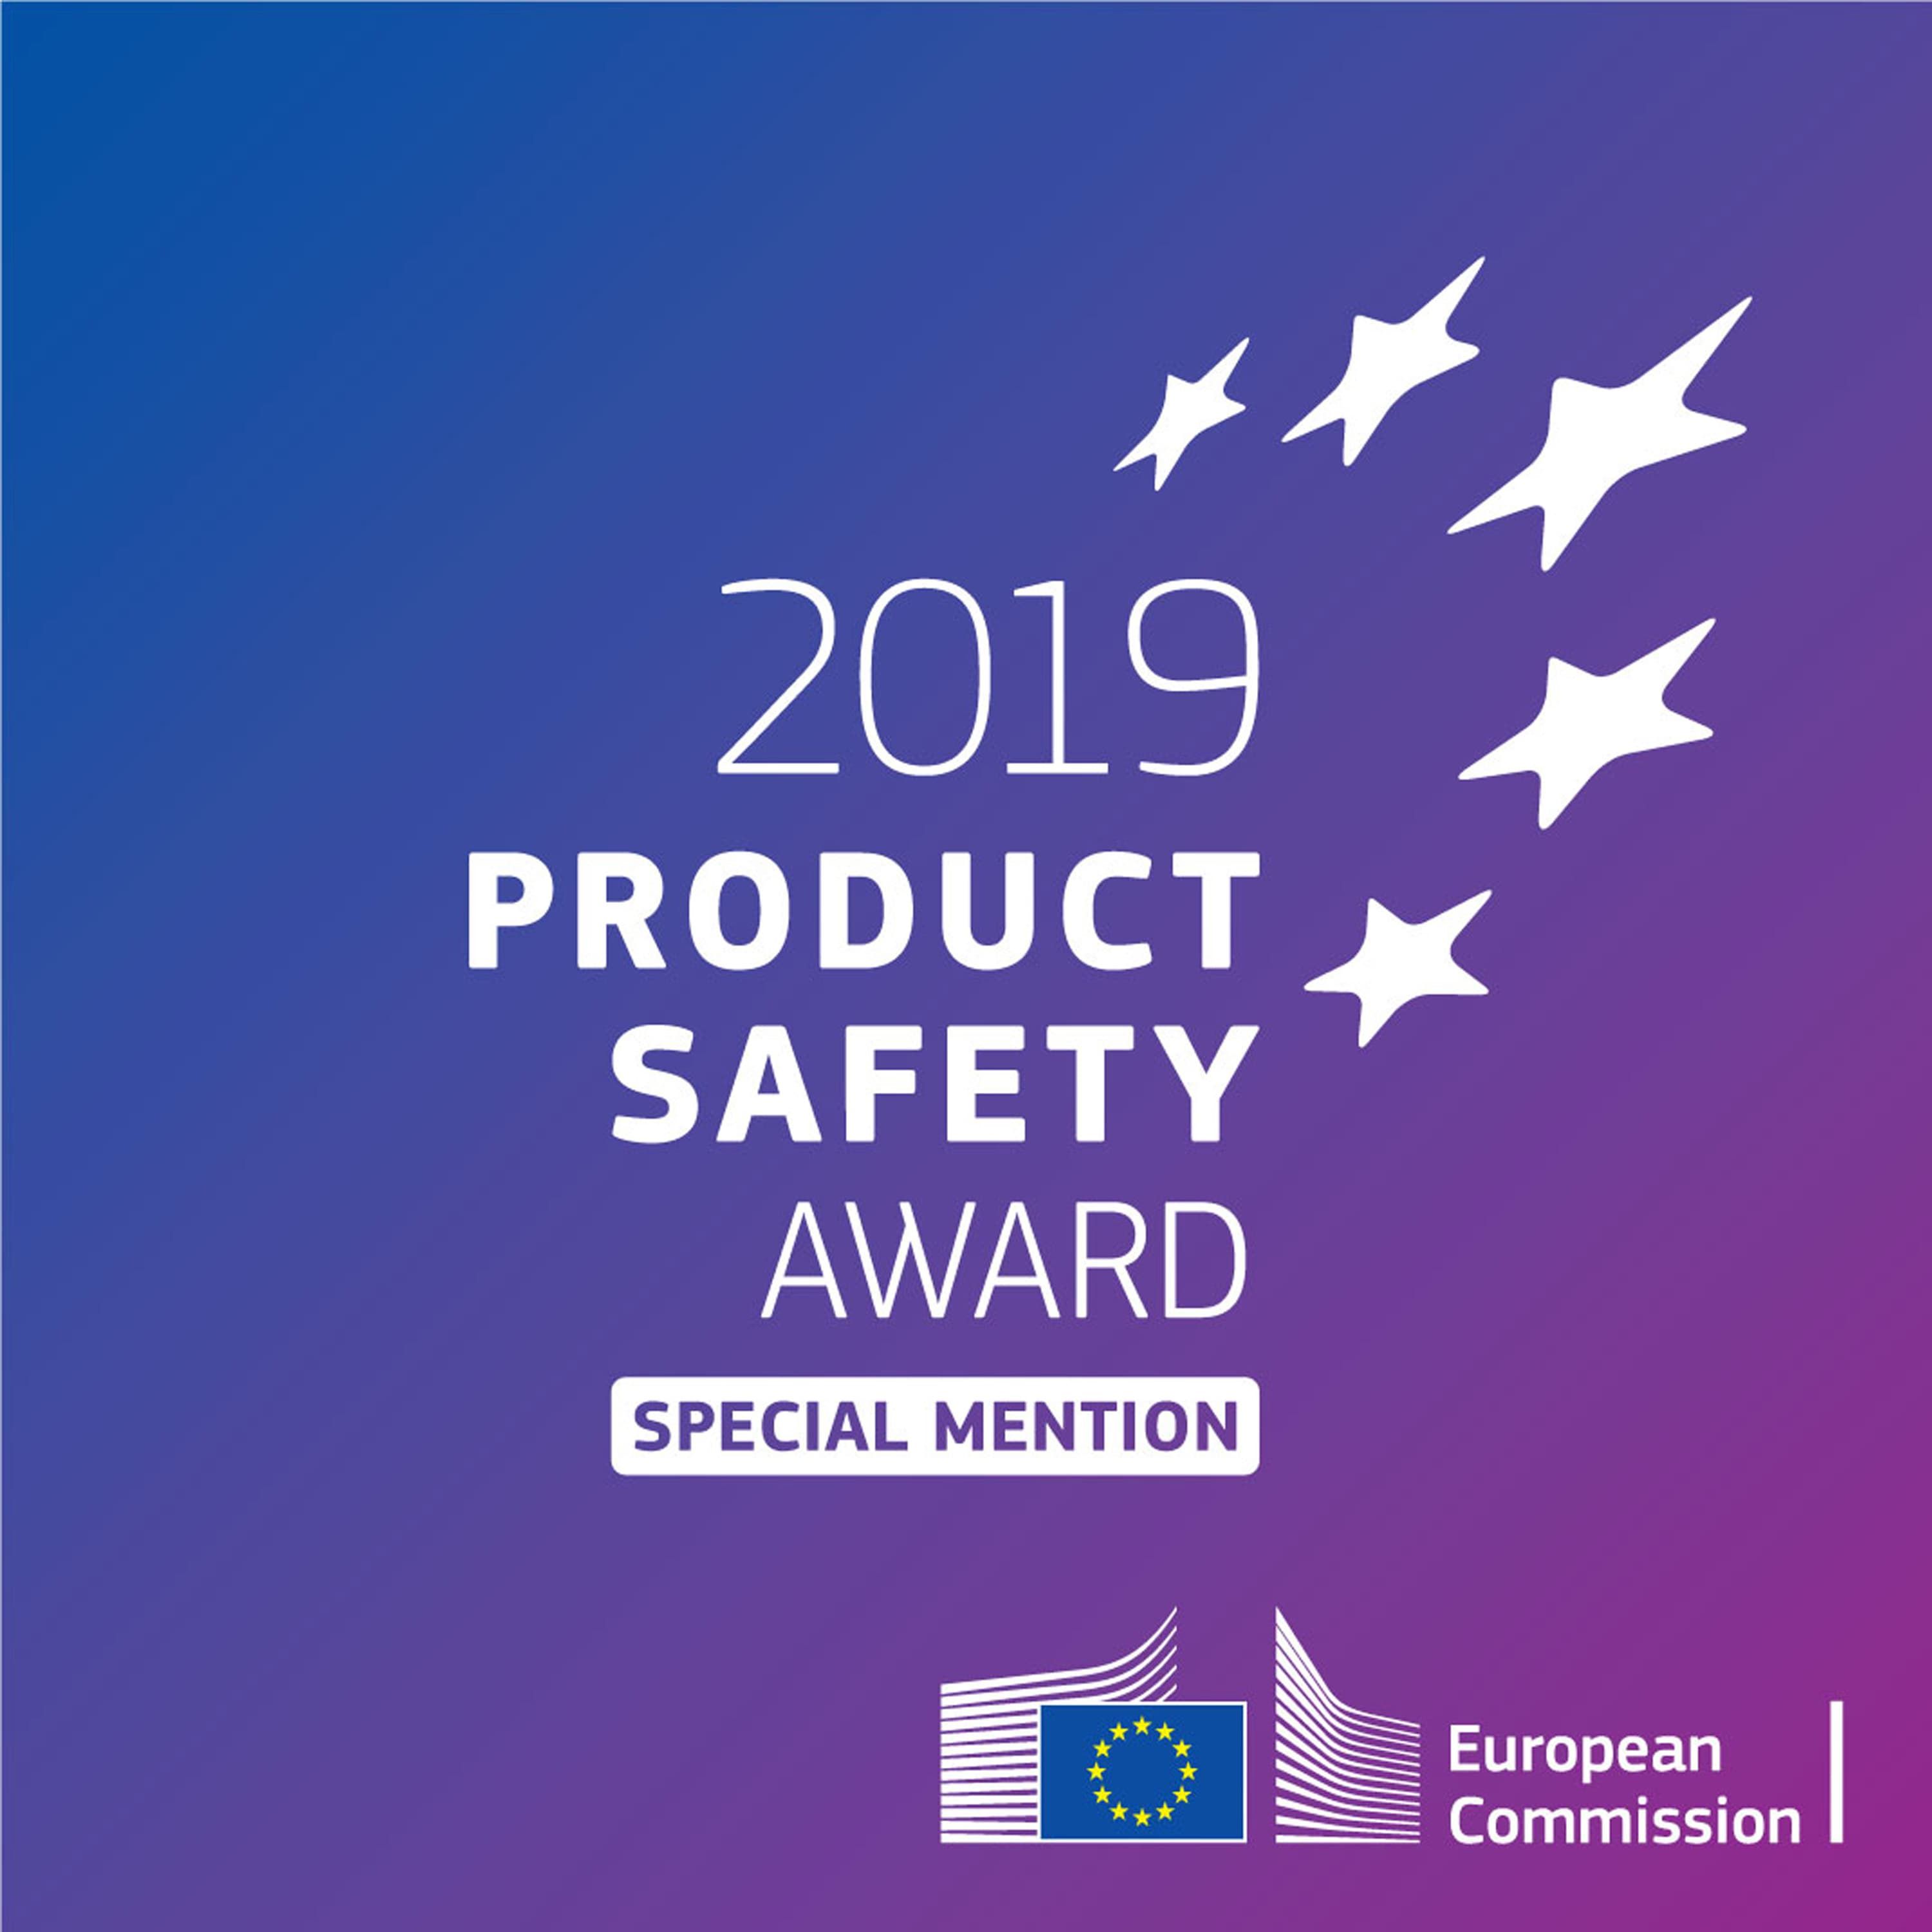 HONORED WITH THE EU PRODUCT SAFETY AWARD 2019